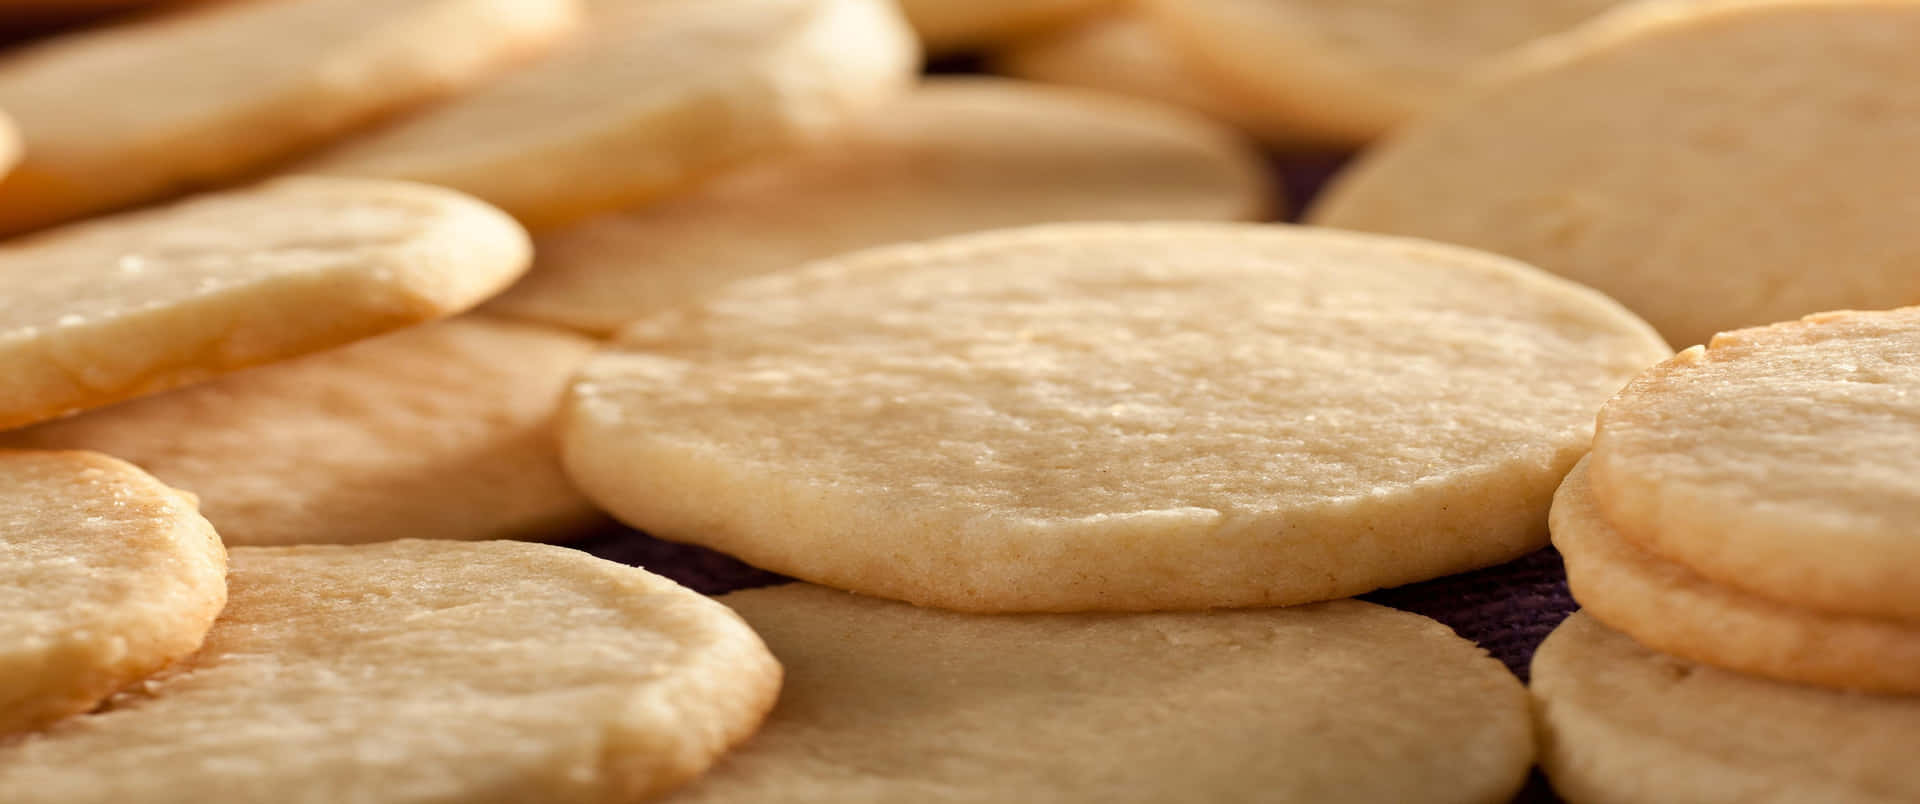 Flat And Sweet Dessert 3440x1440p Cookies Background